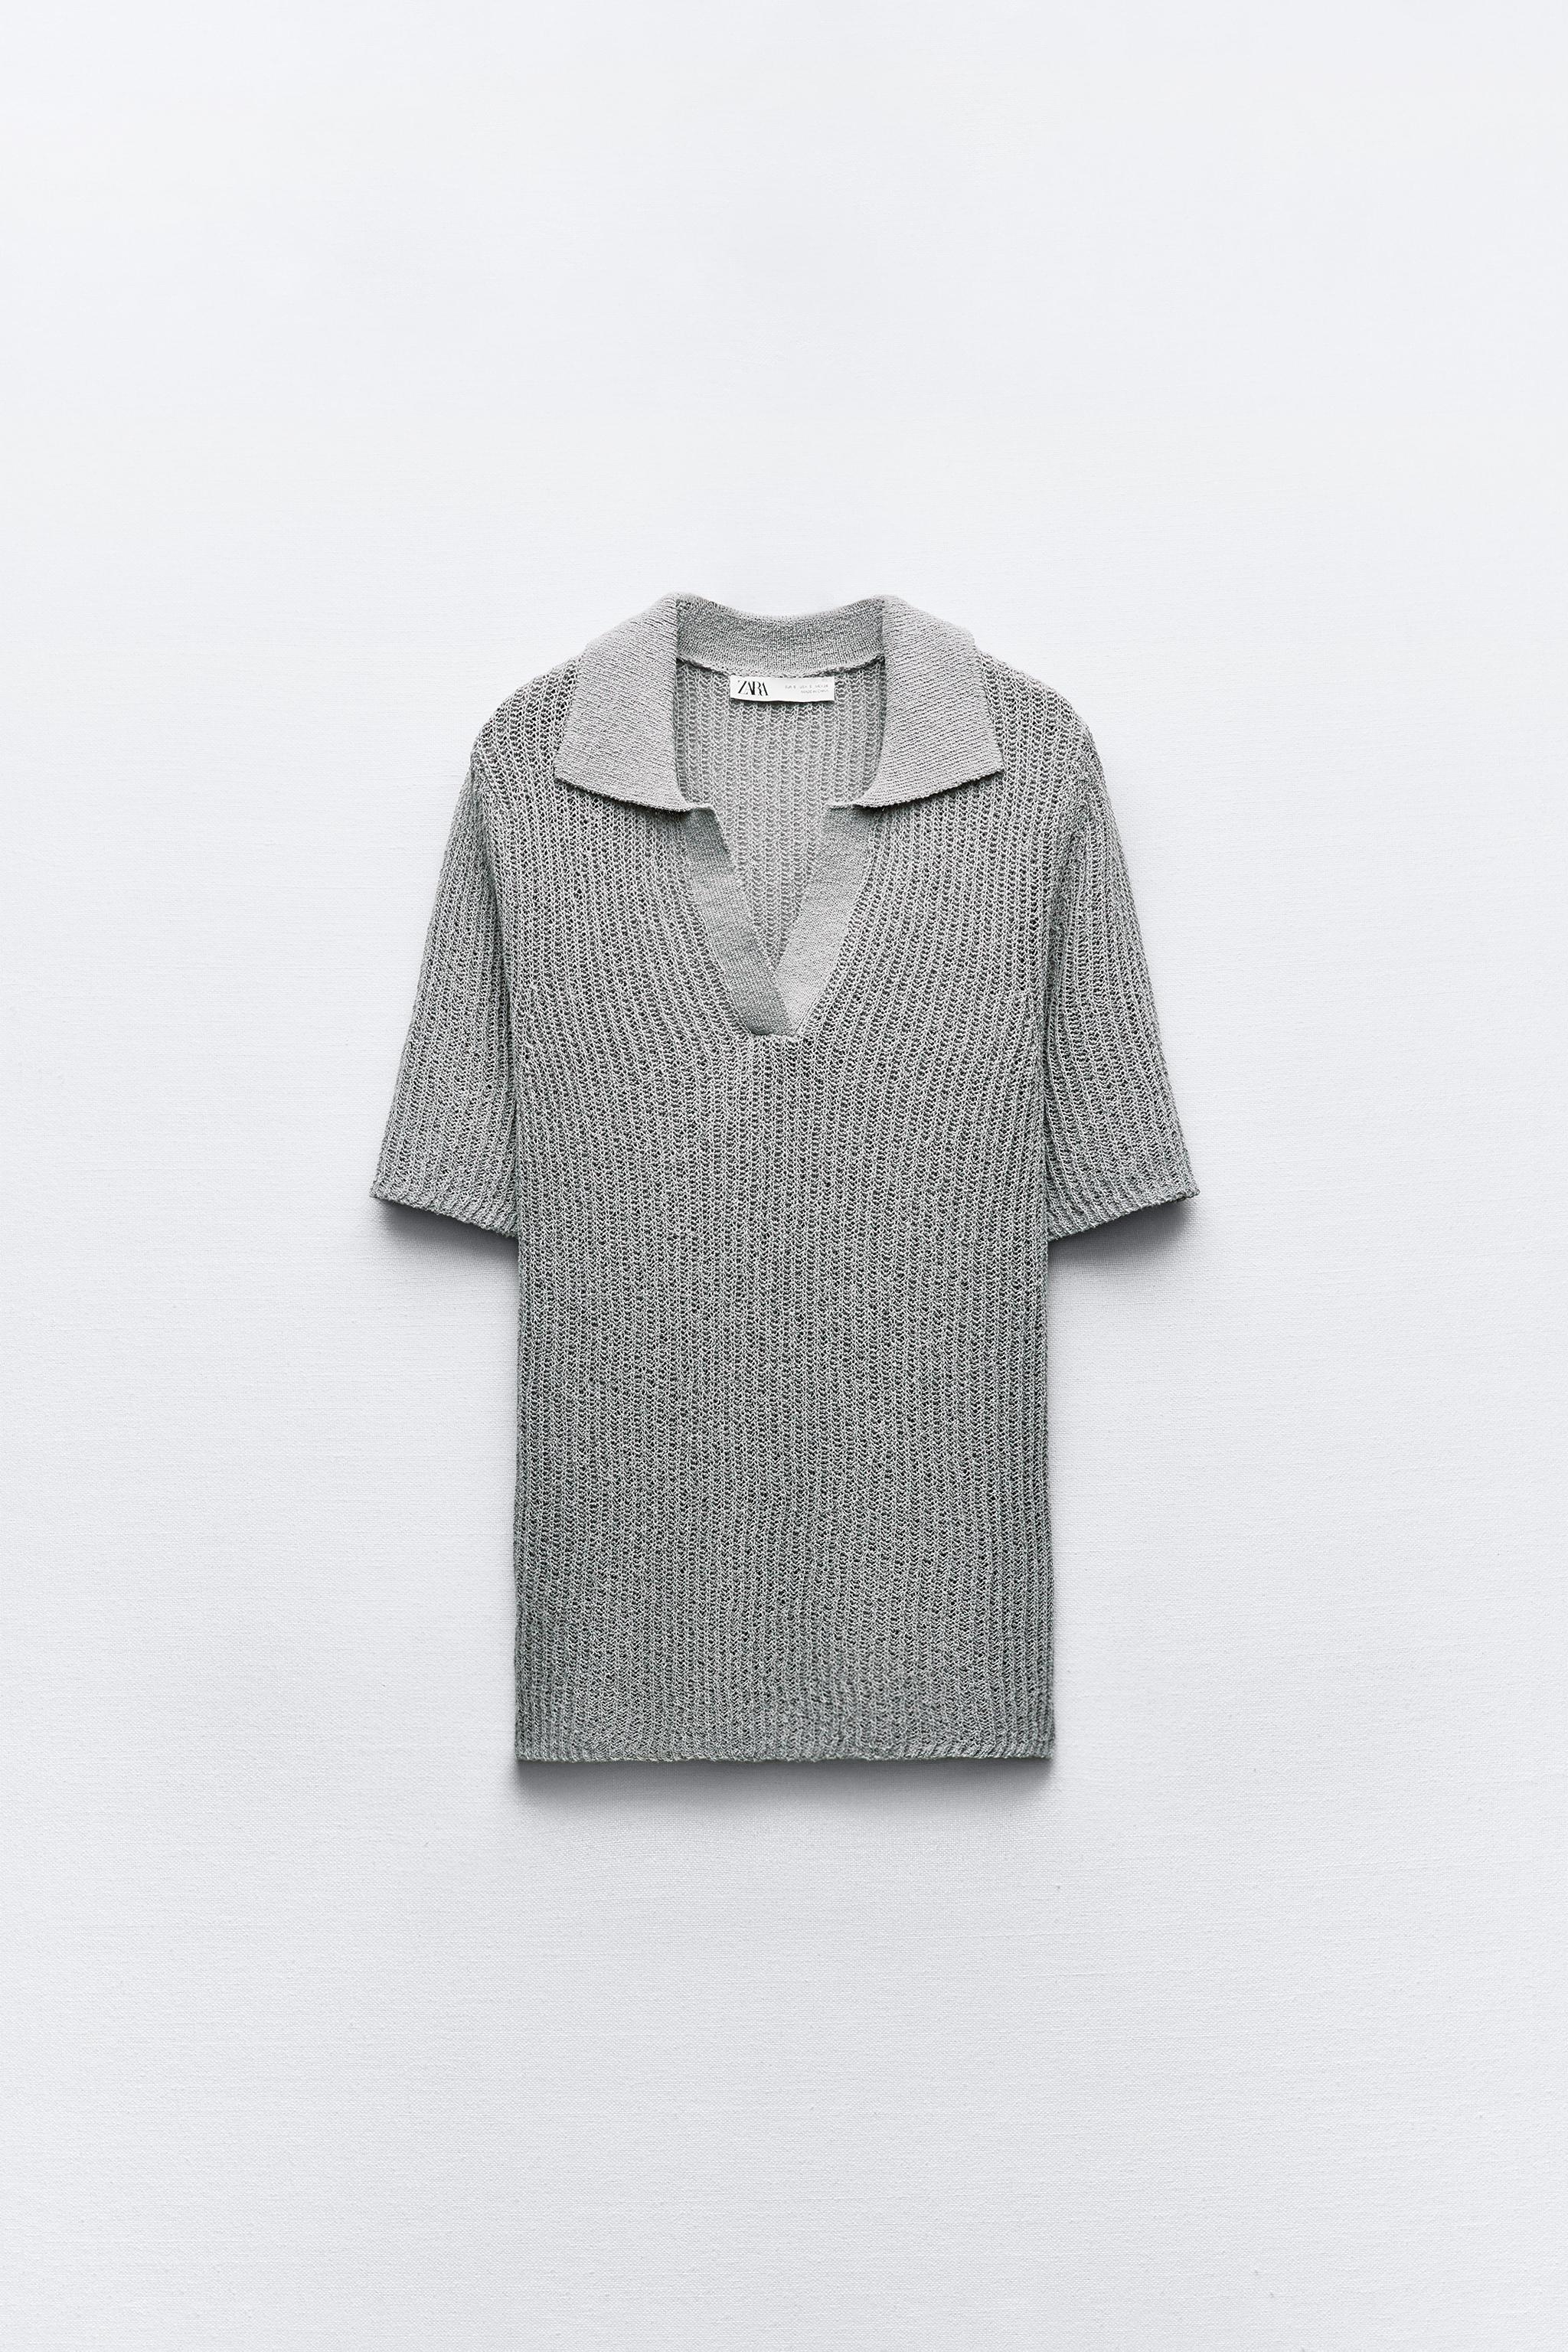 STRUCTURED POLO SHIRT